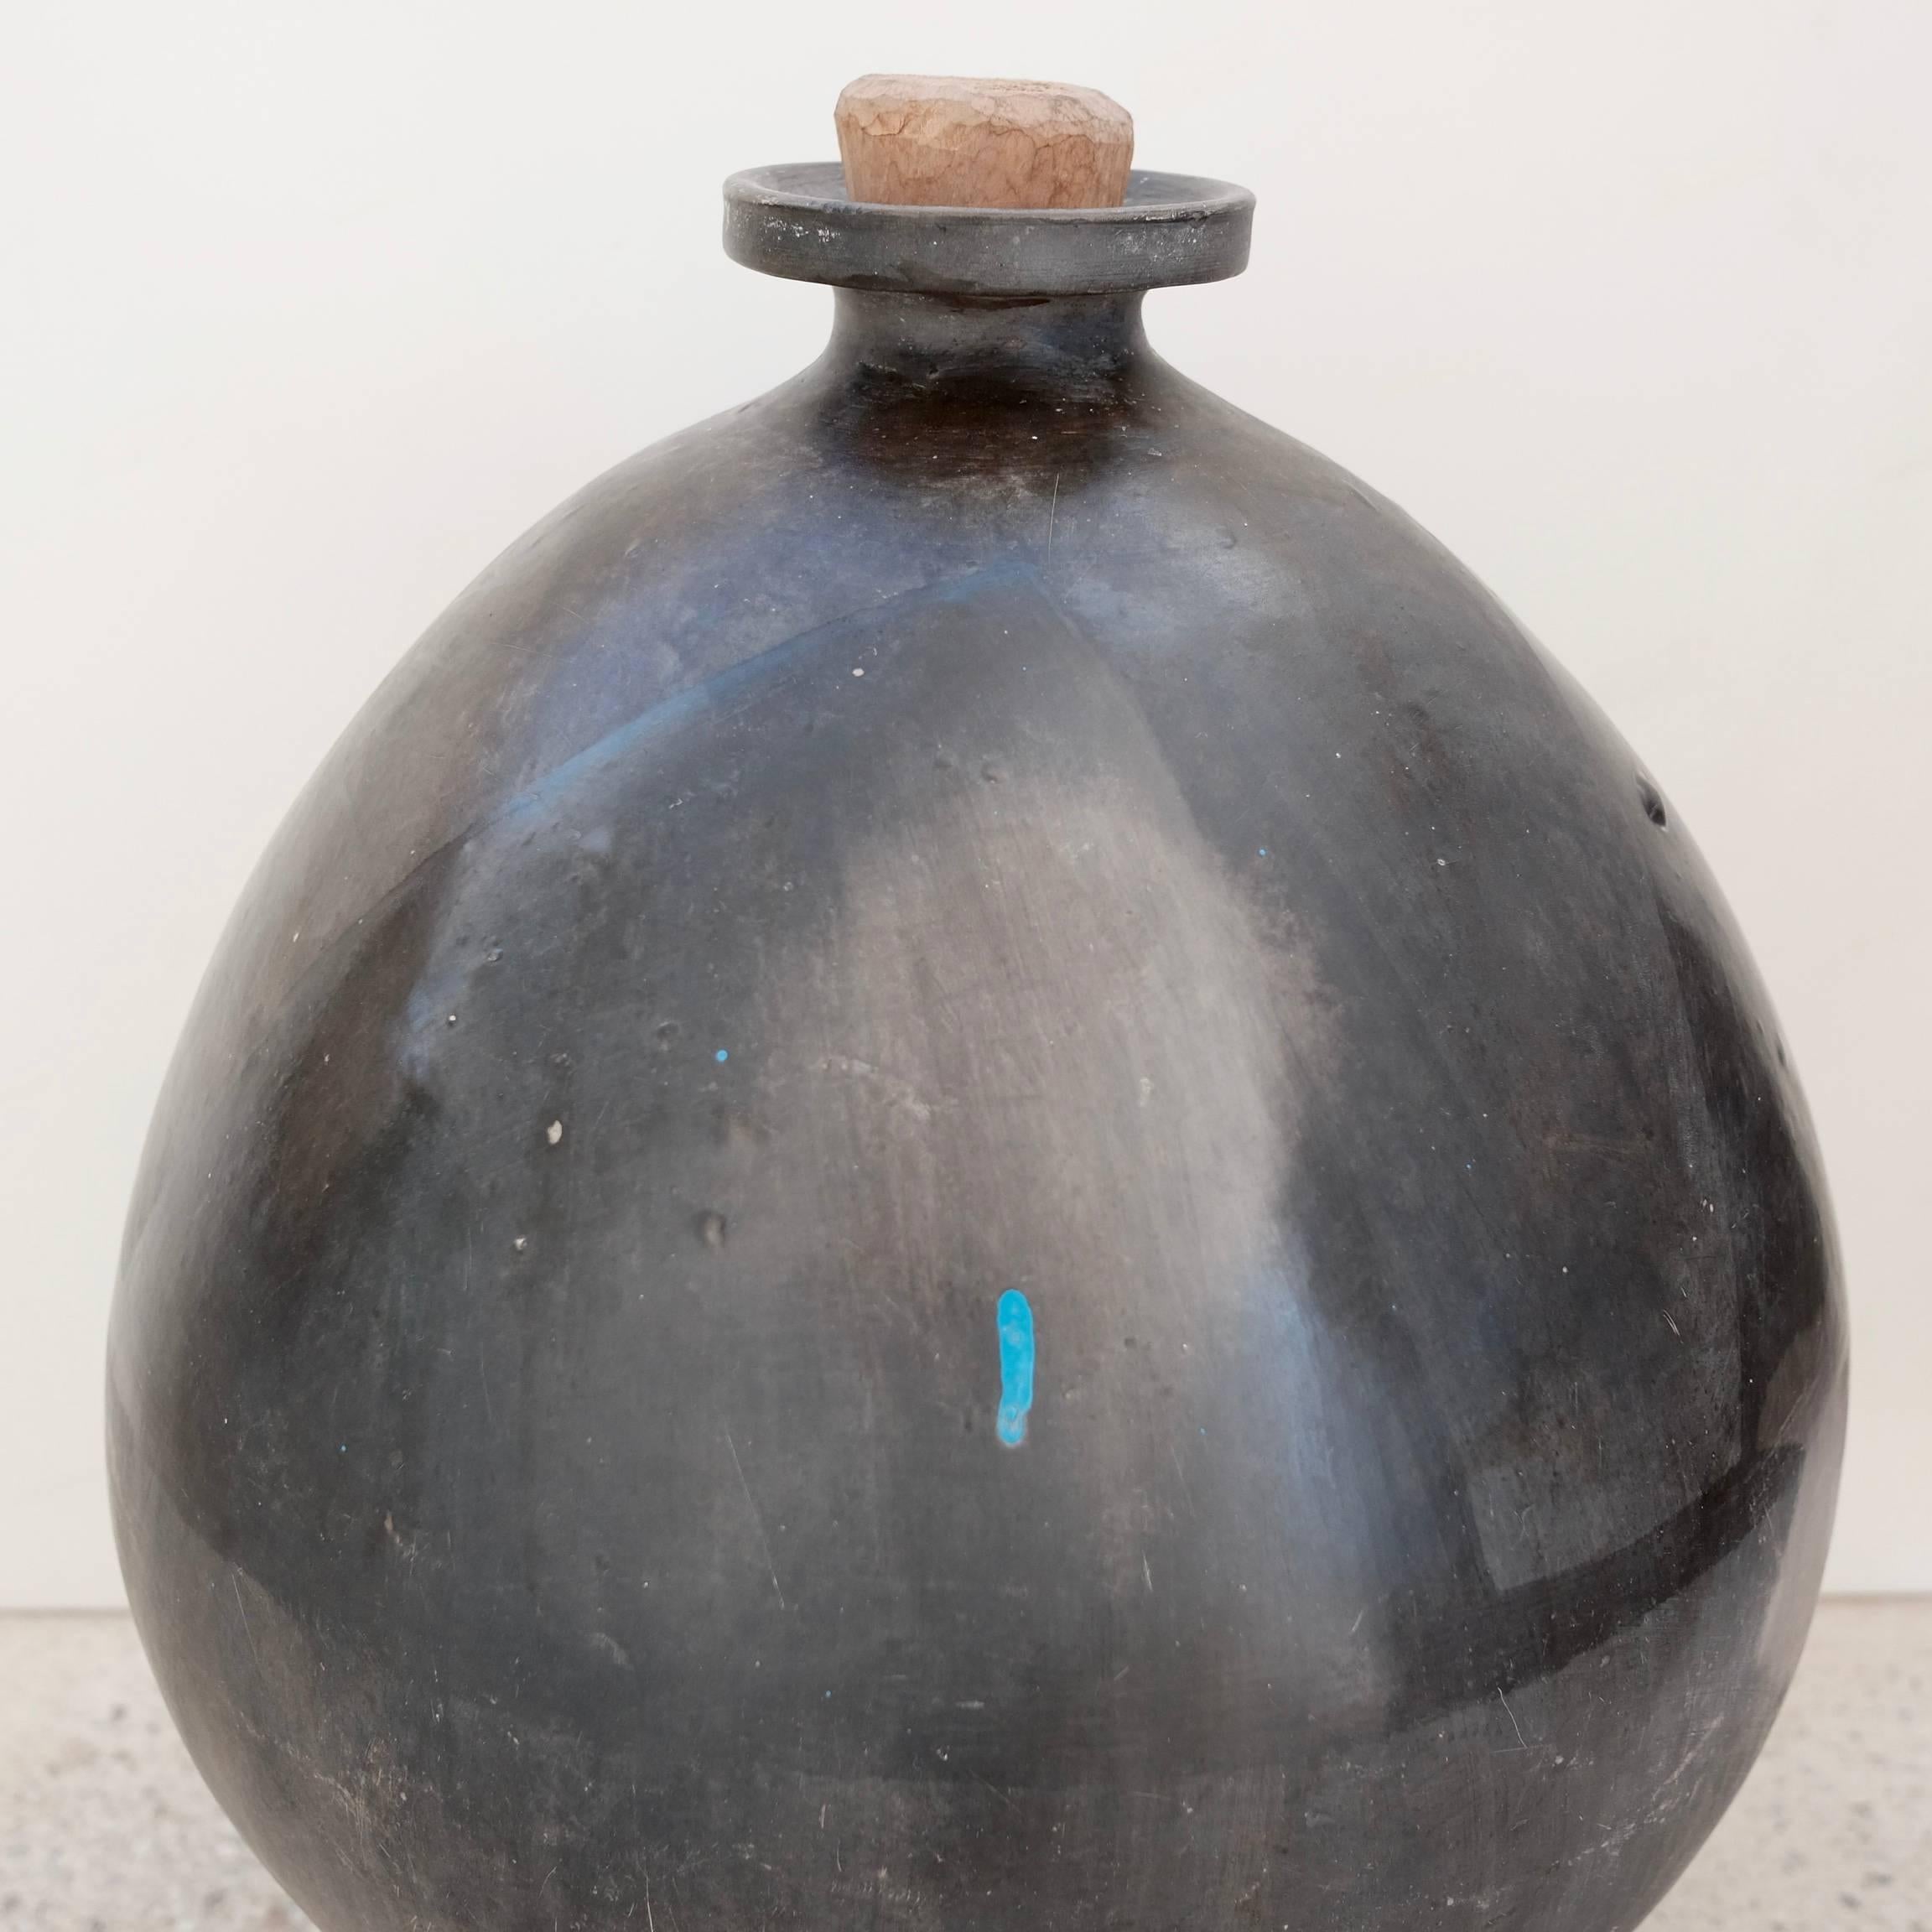 1957 lightly engraved, ceramic black clay pot or jug from San Bartolo Coyotepec, Oaxaca. Used in the 1950s, 1960s and 1970s for transporting local mezcal by way of donkey from village to village by tying ixtle rope from the vessel's neck. This style